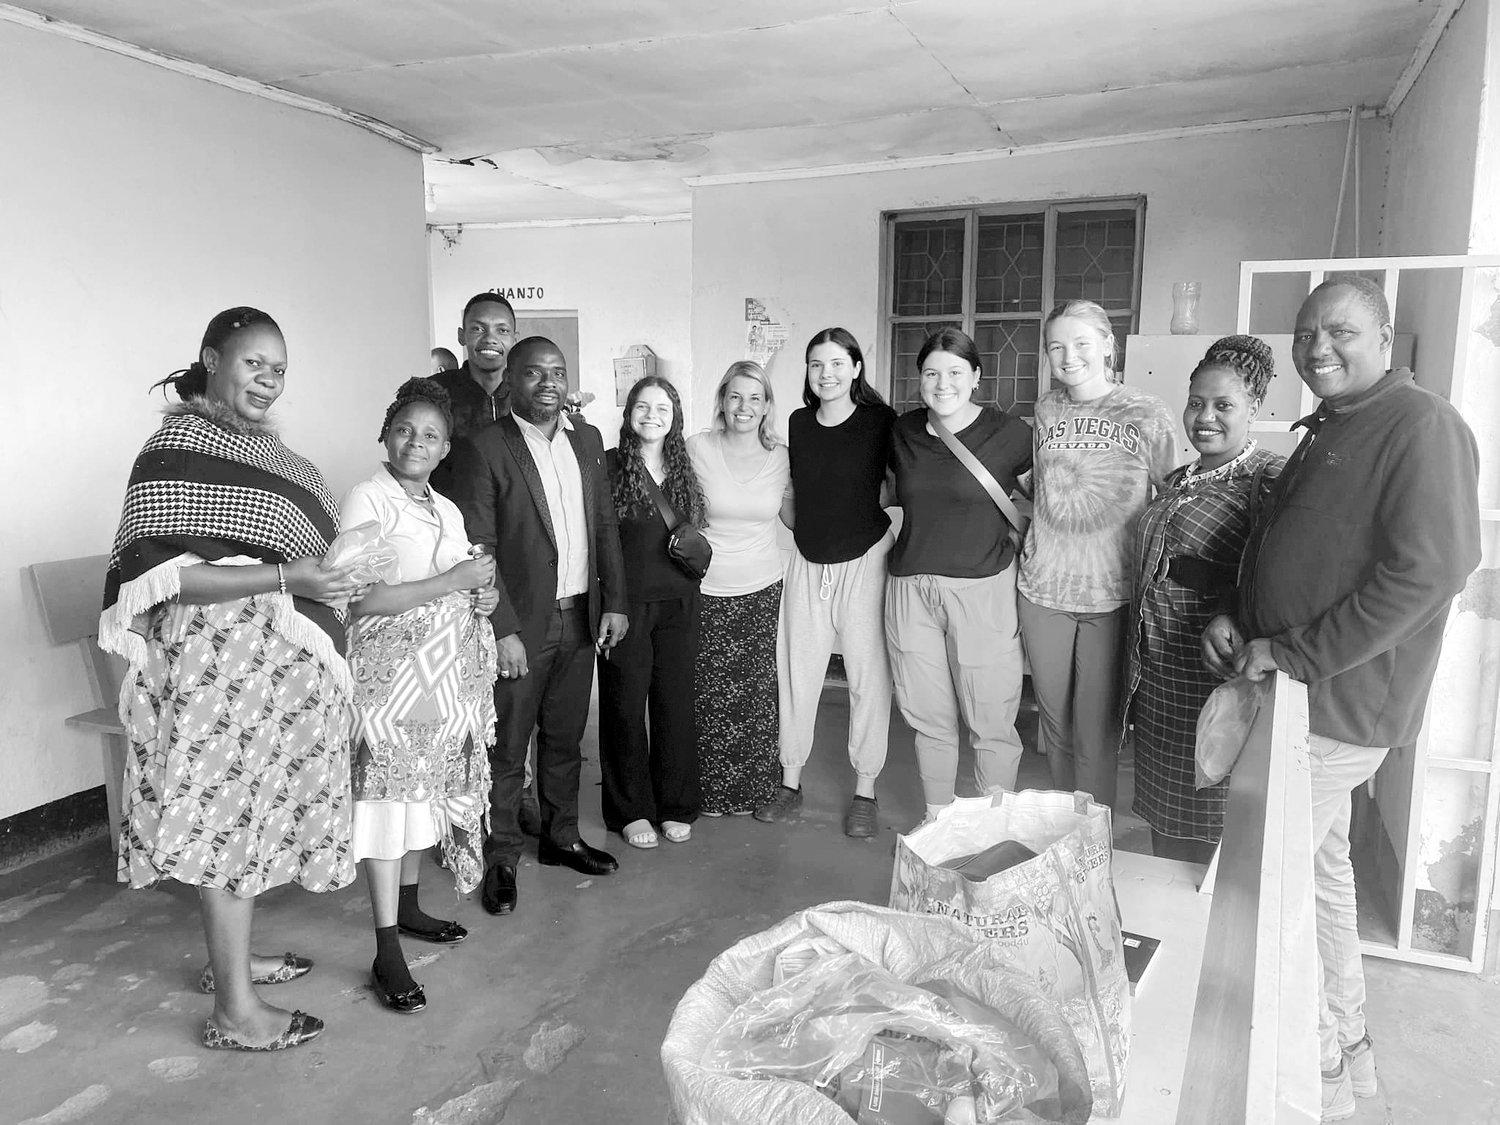 AFRICA VISIT — Wright City native Riley Heiliger, fourth from the right, poses with residents in Tanzania as part of a mission trip with Humanity for Children. The trip helped bring public health information to the country’s women.